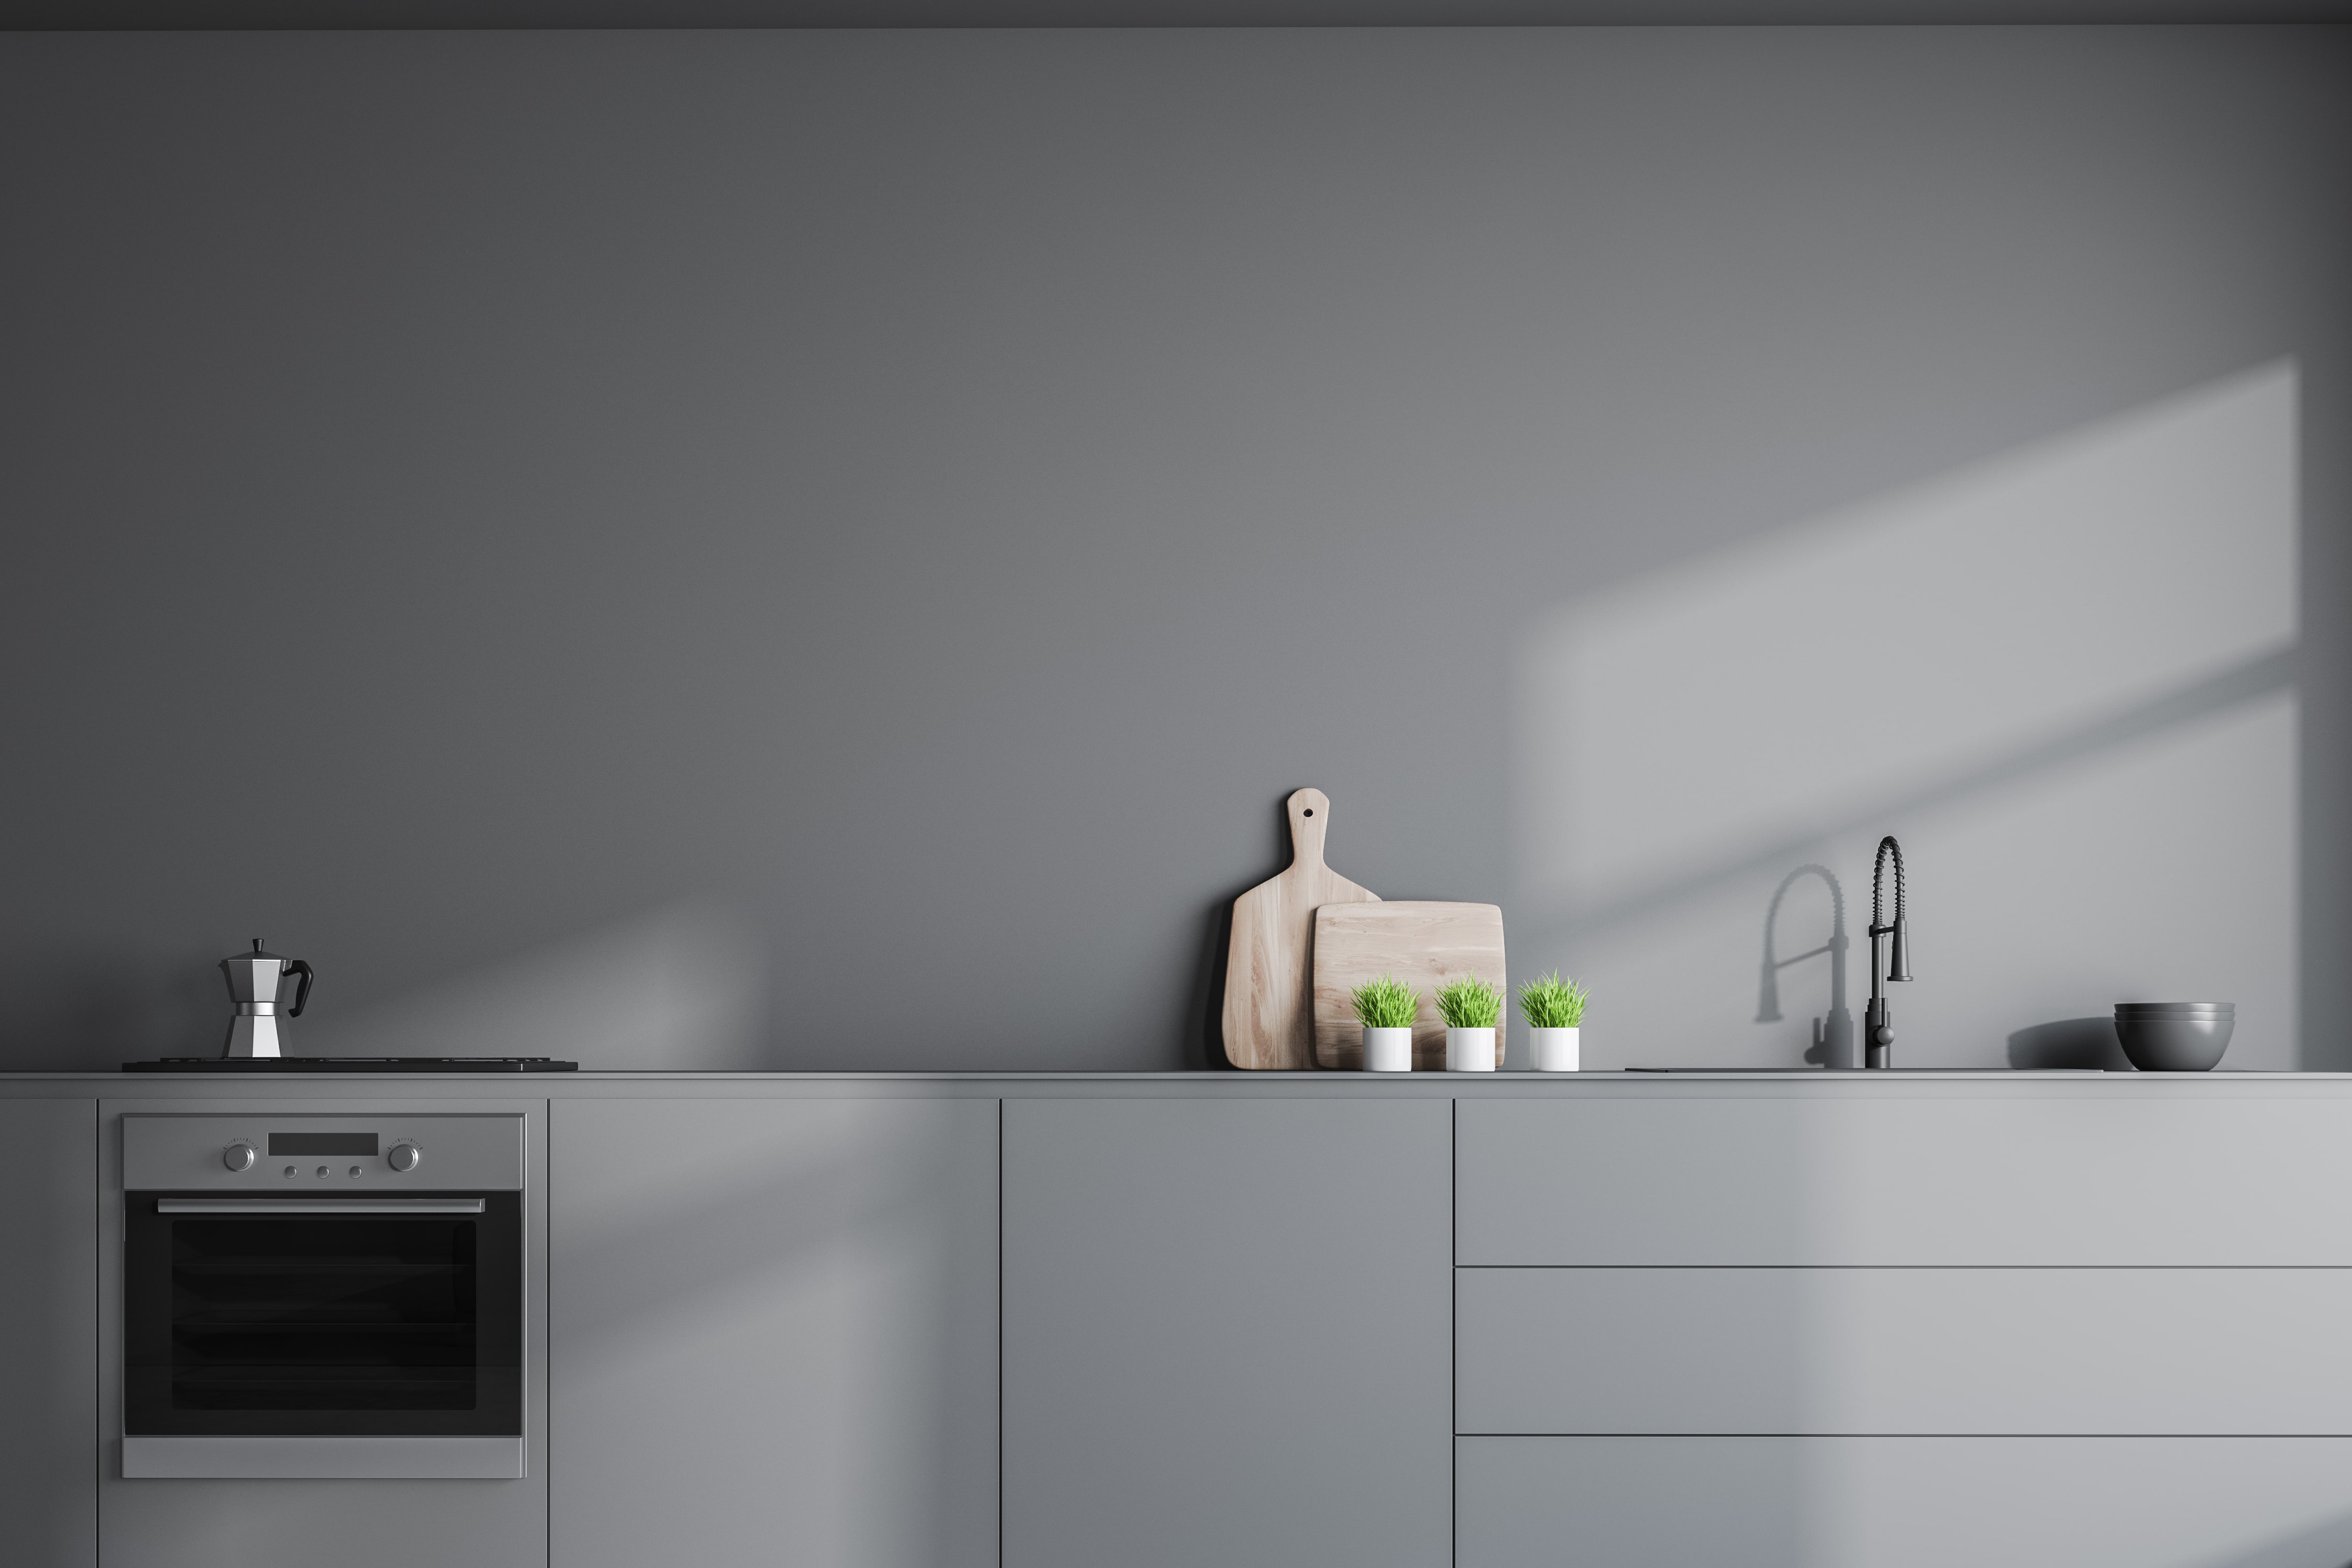 A simple, gray kitchen with very minimal decor